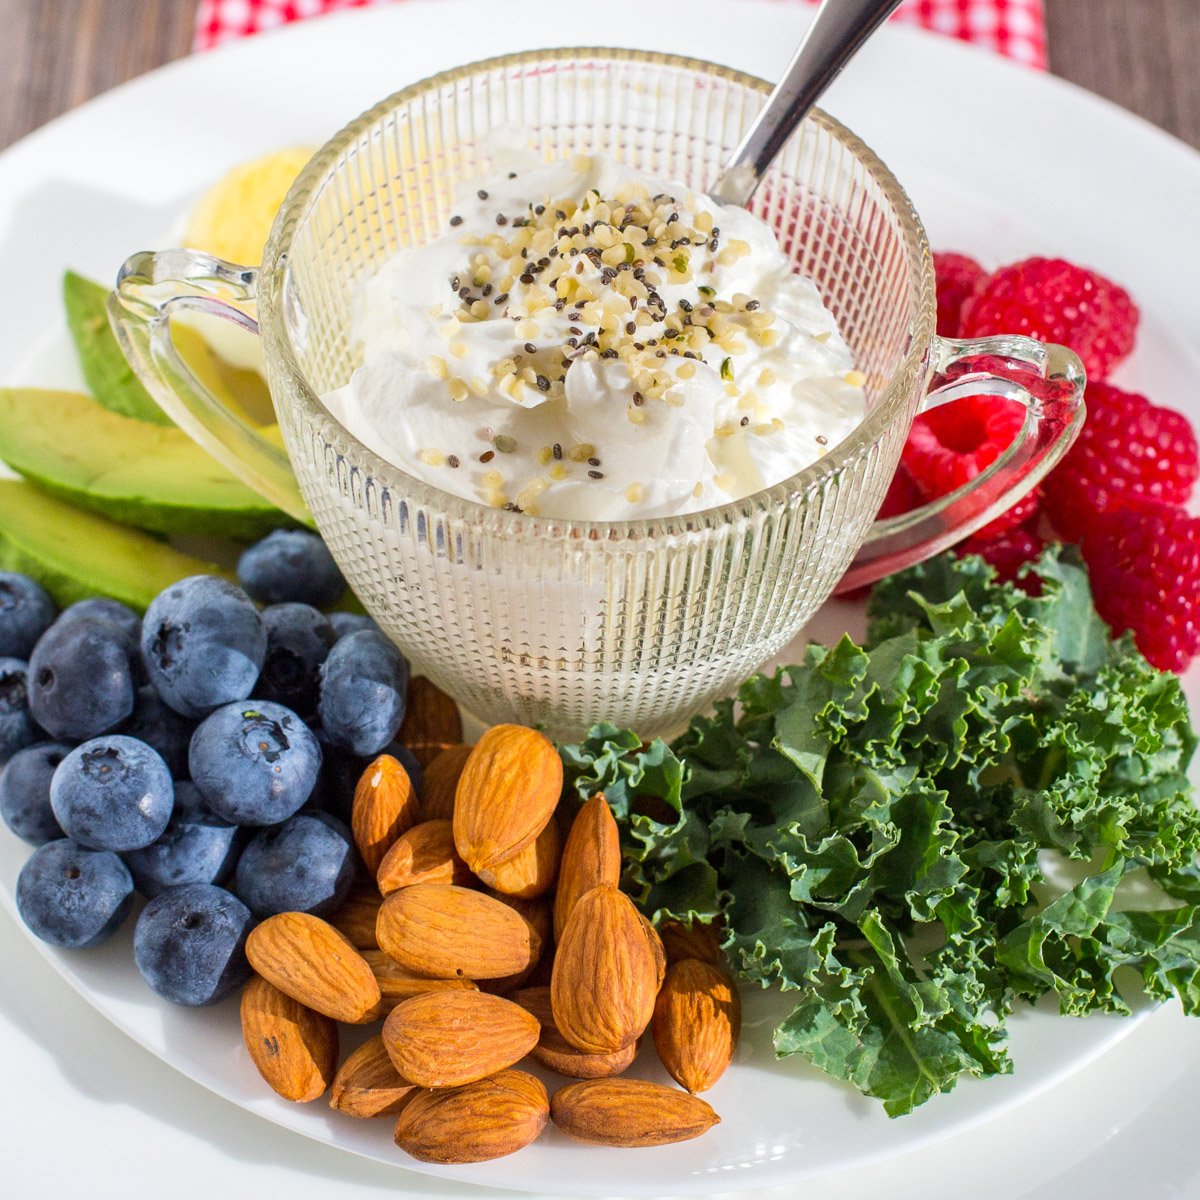 Cup of yogurt sprinkled with seeds on white plate of berries, almonds, avocado and kale for a superfood breakfast.